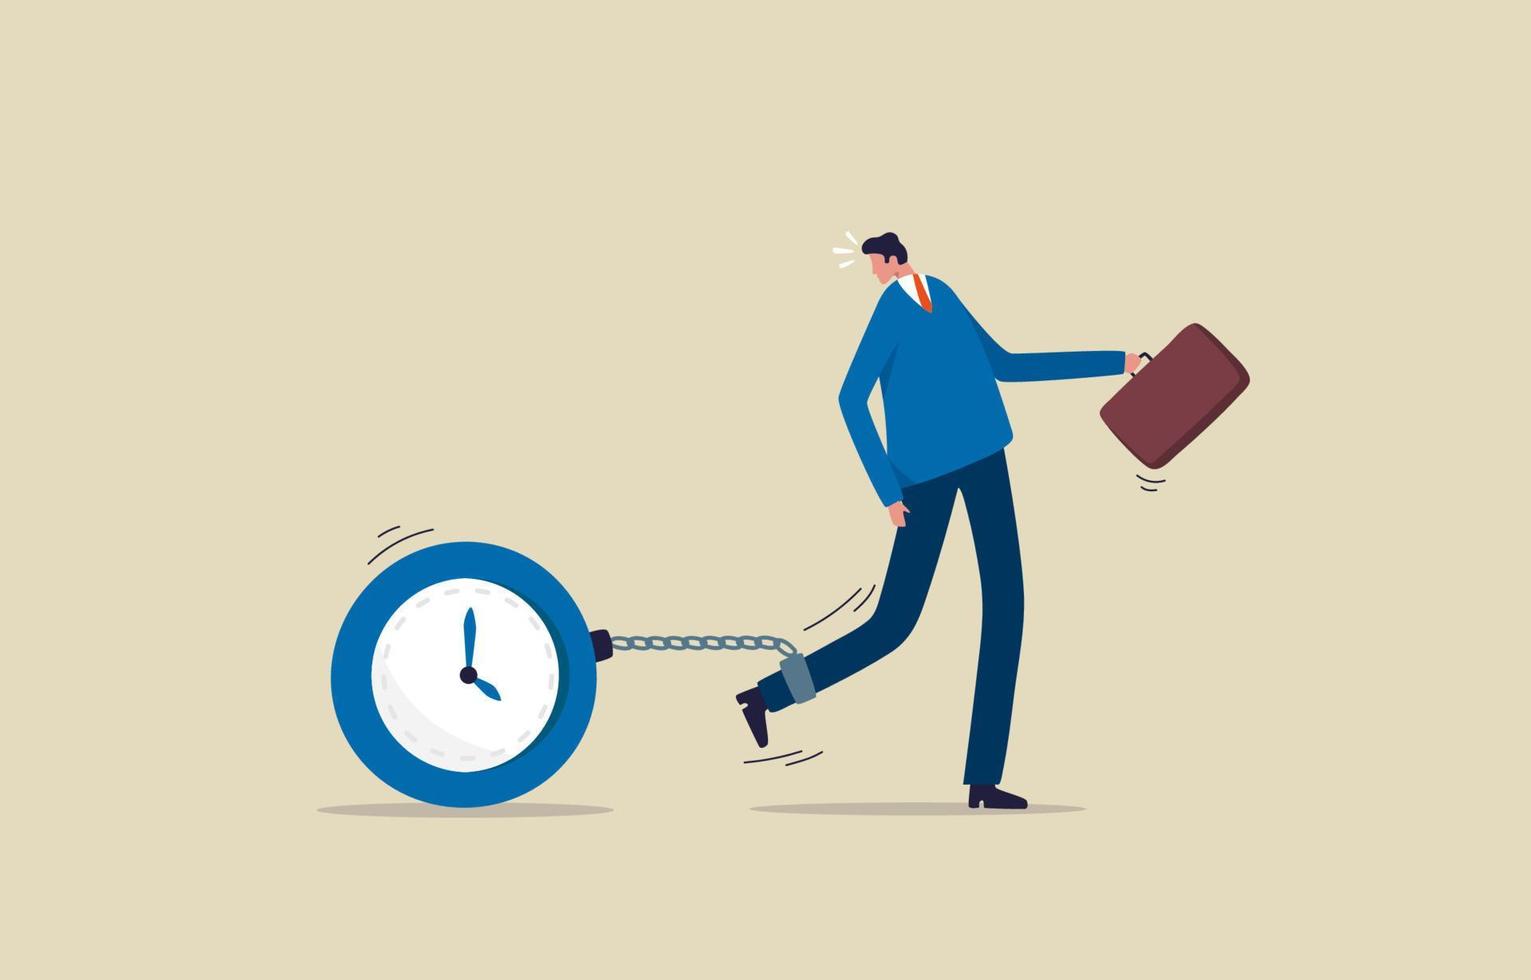 https://static.vecteezy.com/system/resources/previews/015/277/970/non_2x/time-management-failure-heavy-work-makes-people-trapped-in-time-businessman-pulling-clock-shaped-ball-and-chain-illustration-vector.jpg